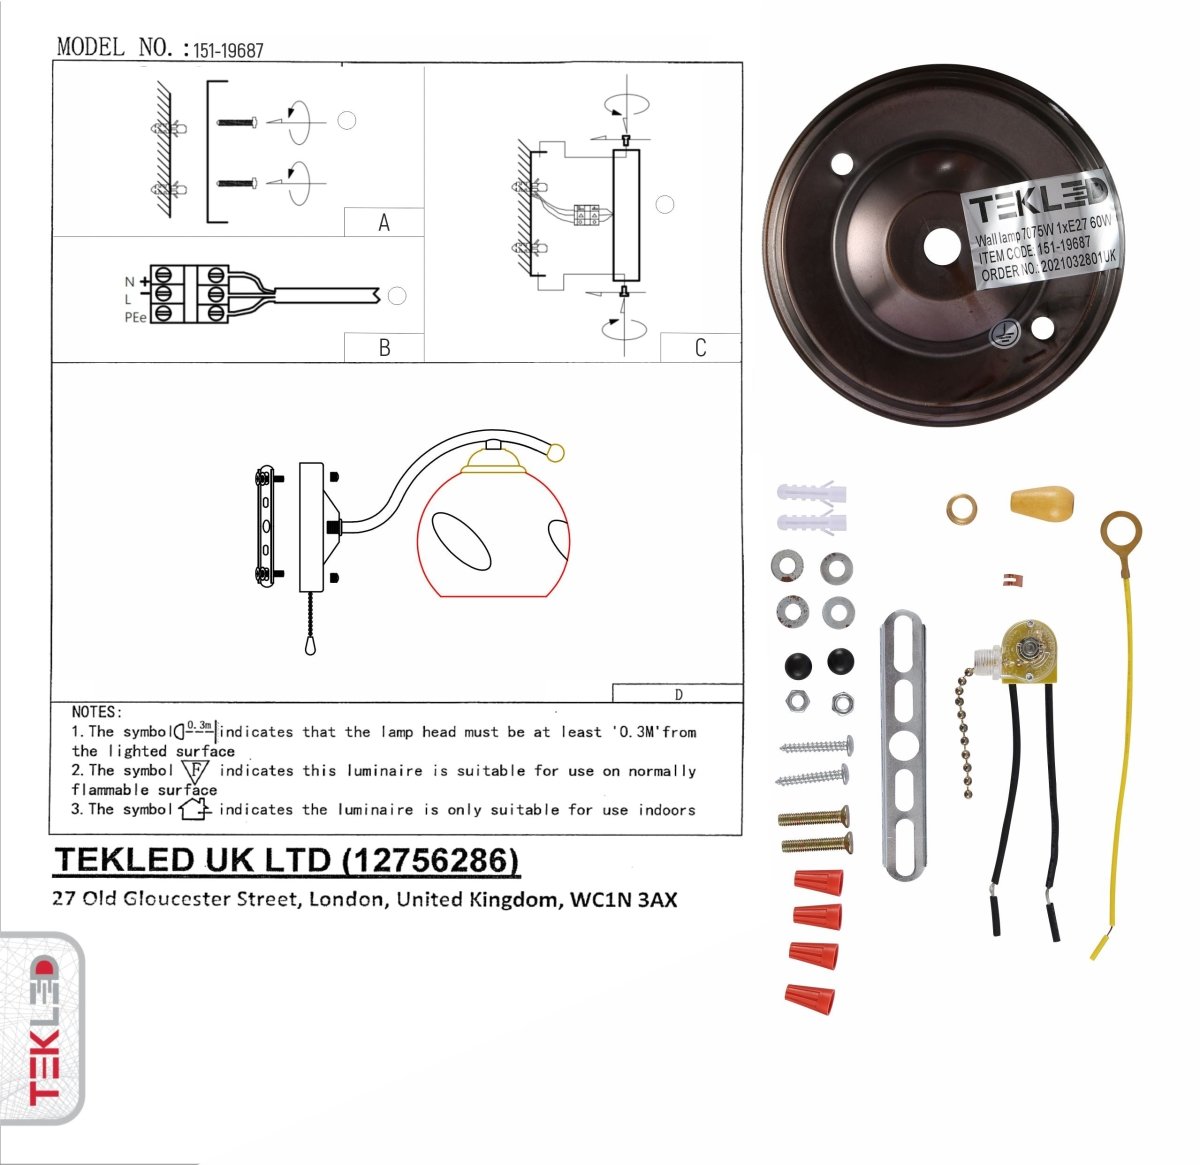 User manual and box content of amber glass black and antique brass wall light e27 and pull down switch